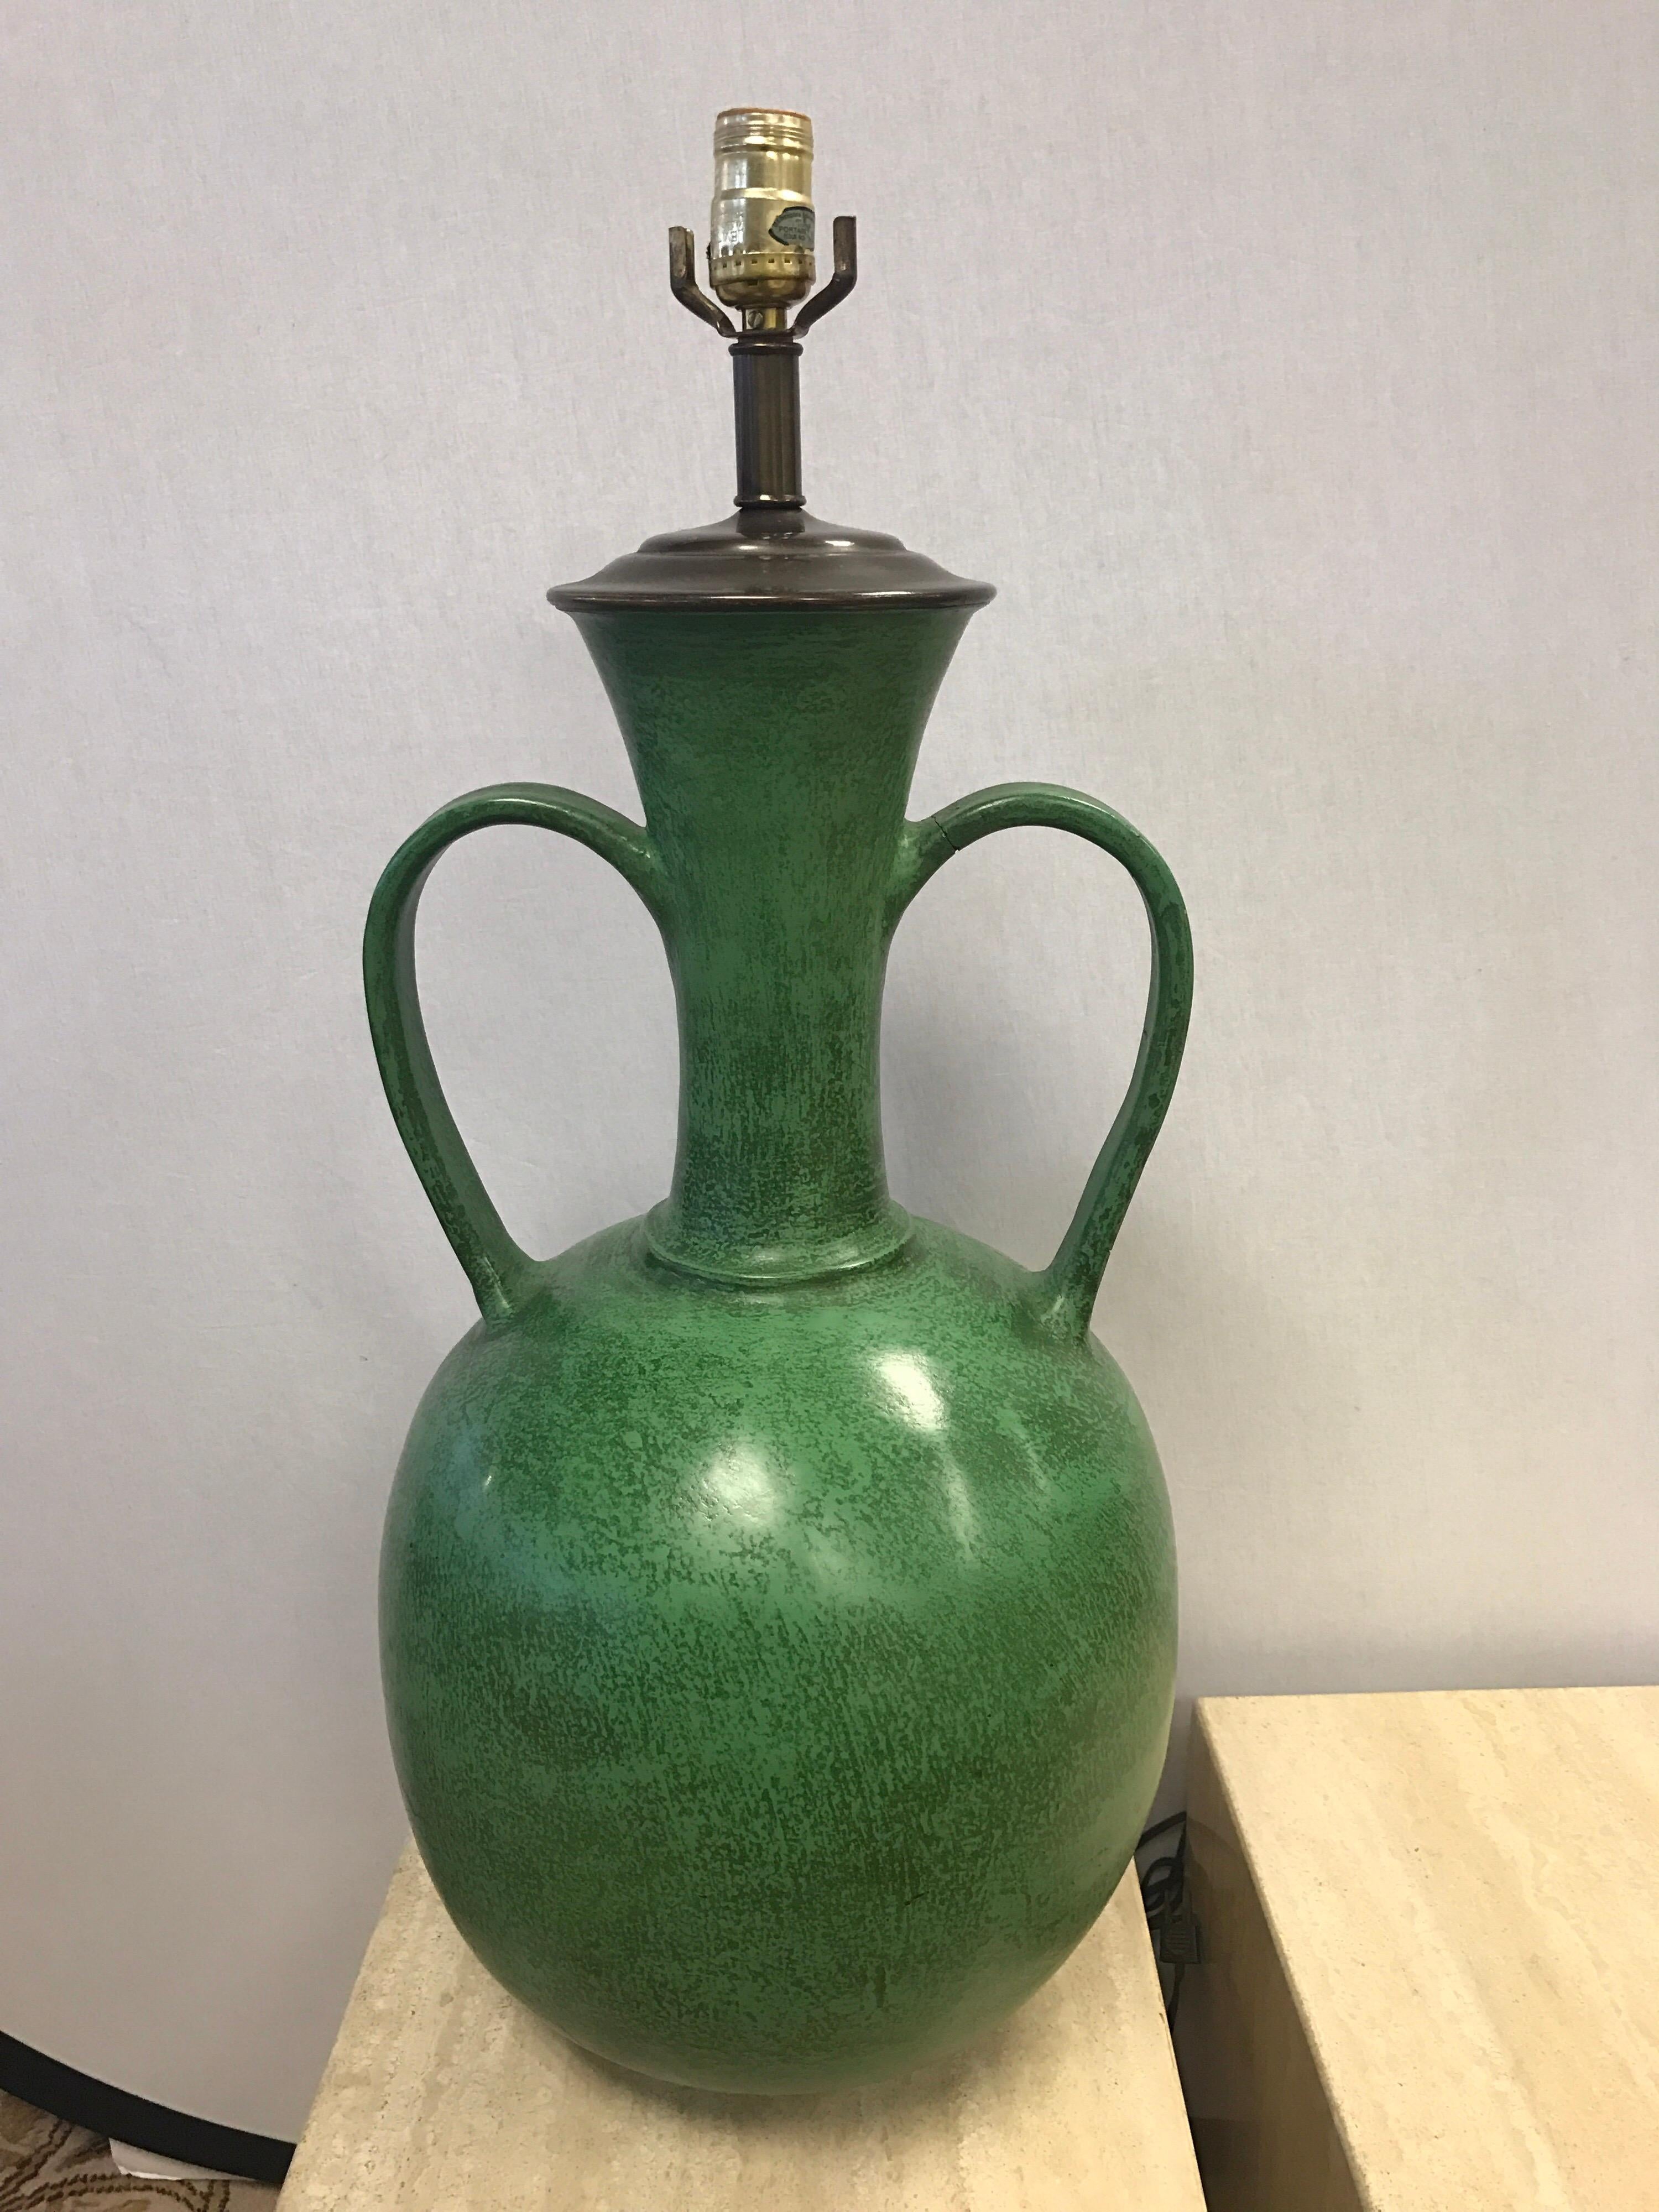 Danish modern tall table lamp in a green glaze. All original. Condition is very good save for a repair on one of the arms/handles.